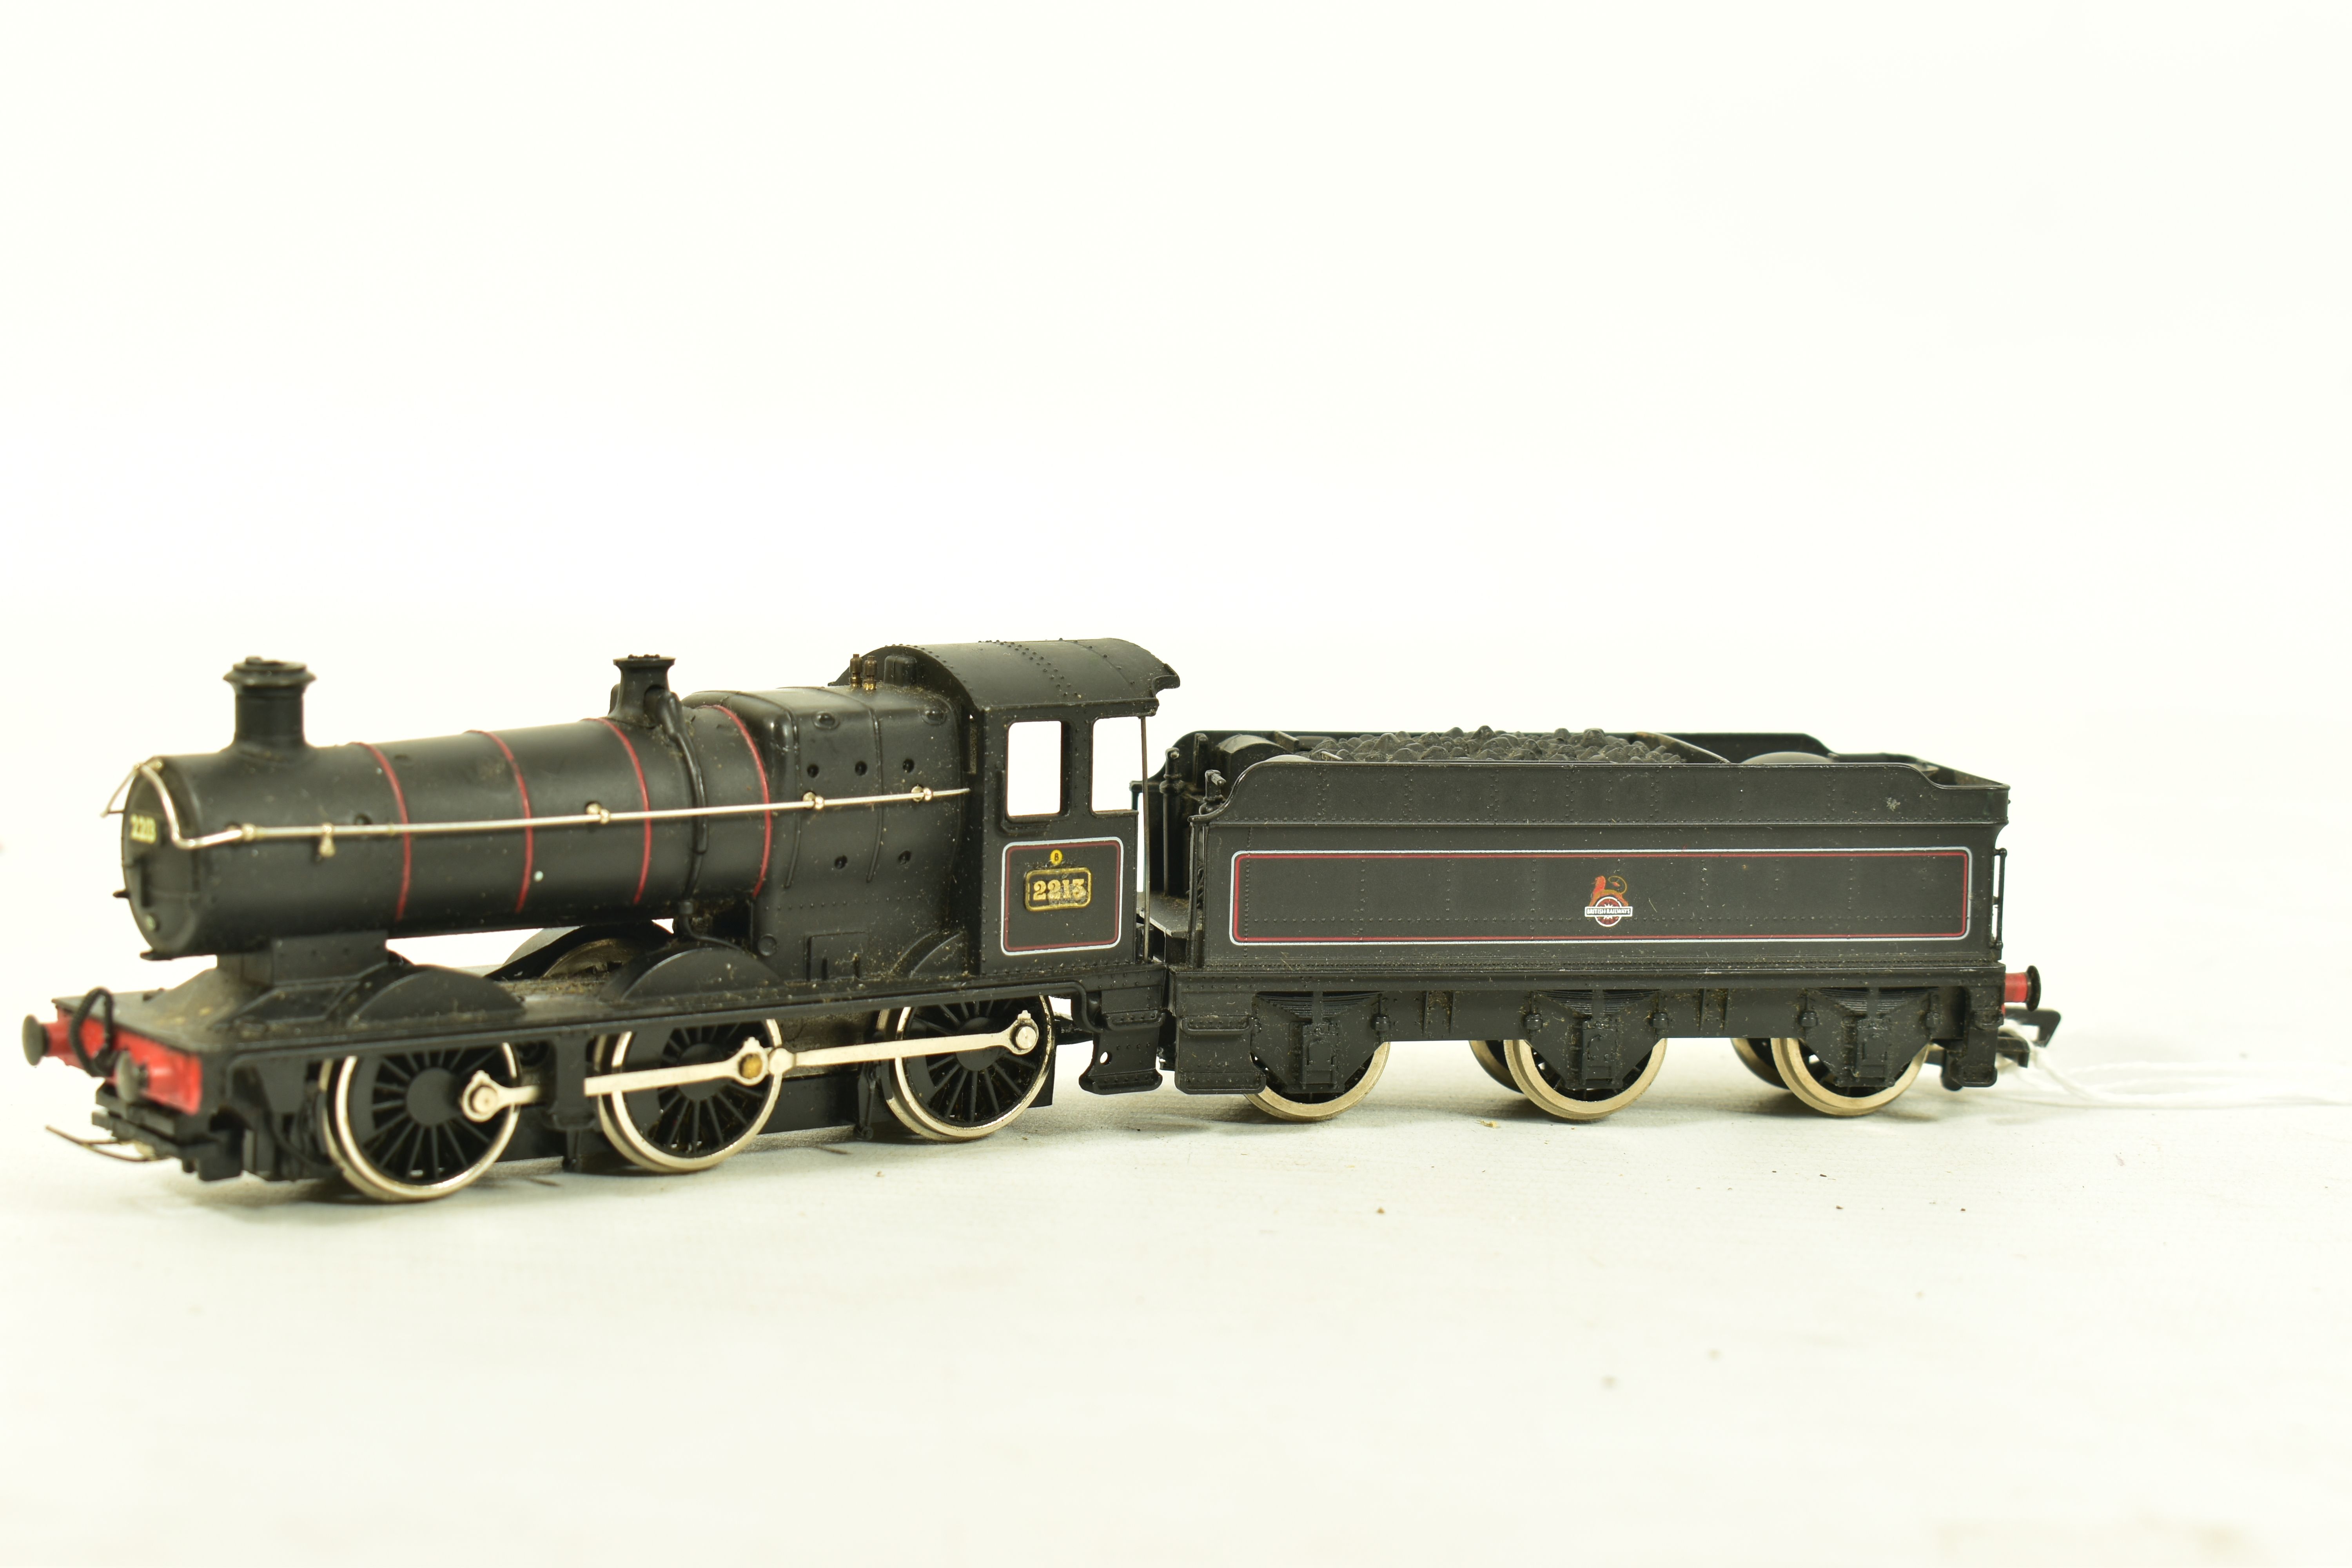 FOUR BOXED MAINLINE OO GAUGE COLLETT GOODS LOCOMOTIVES, 2 x No.3205, G.W.R. green livery (37 058), - Image 4 of 9